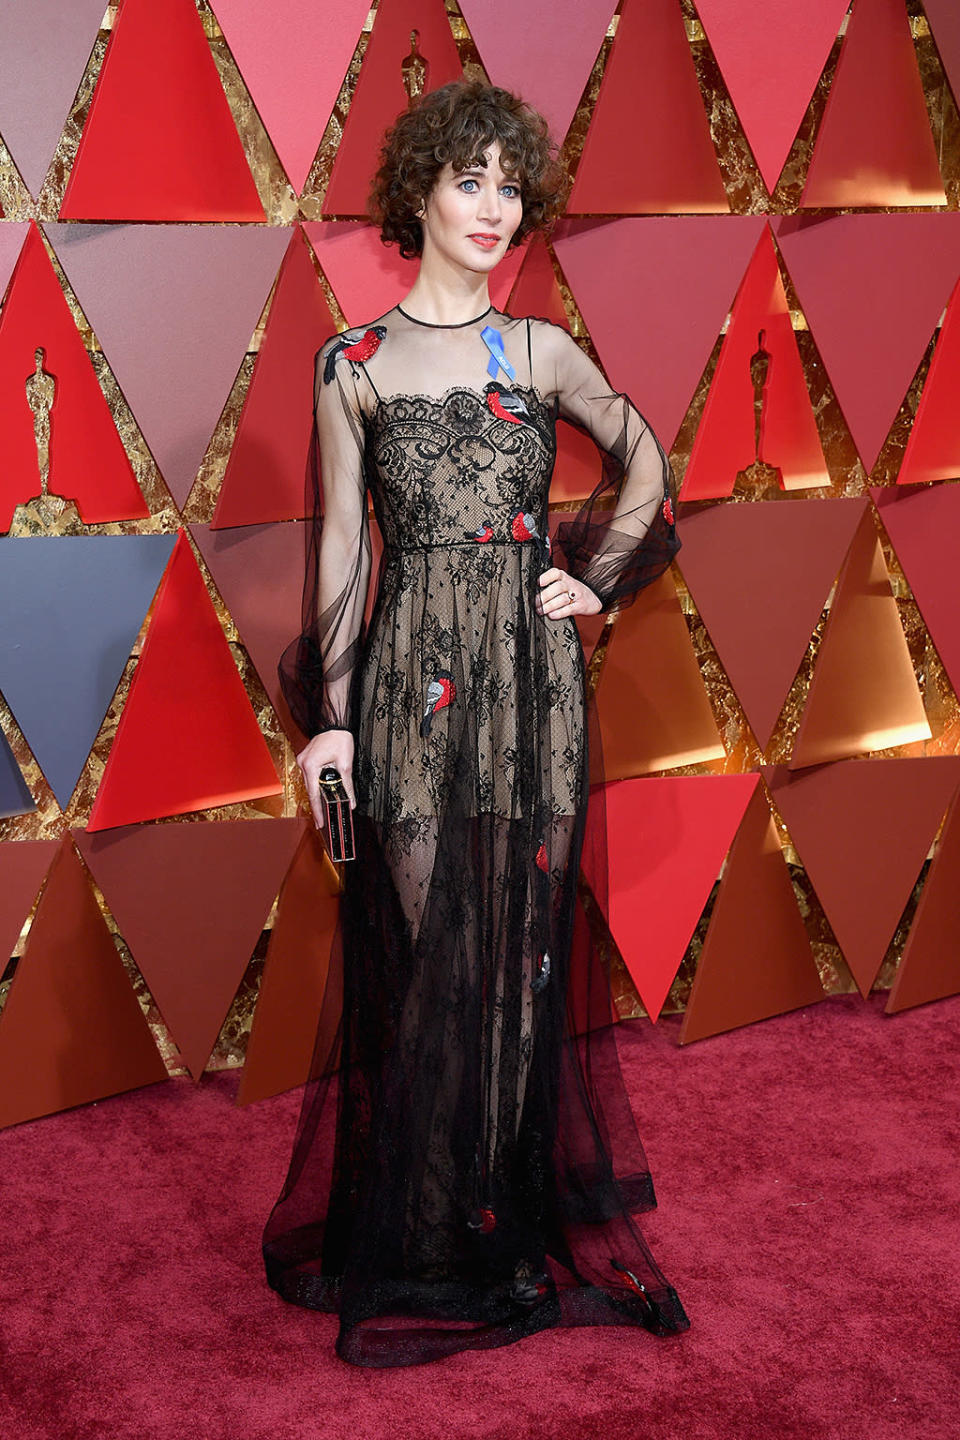 <p>Director Miranda July attends the 89th Annual Academy Awards at Hollywood & Highland Center on February 26, 2017 in Hollywood, California. (Photo by Kevork Djansezian/Getty Images) </p>